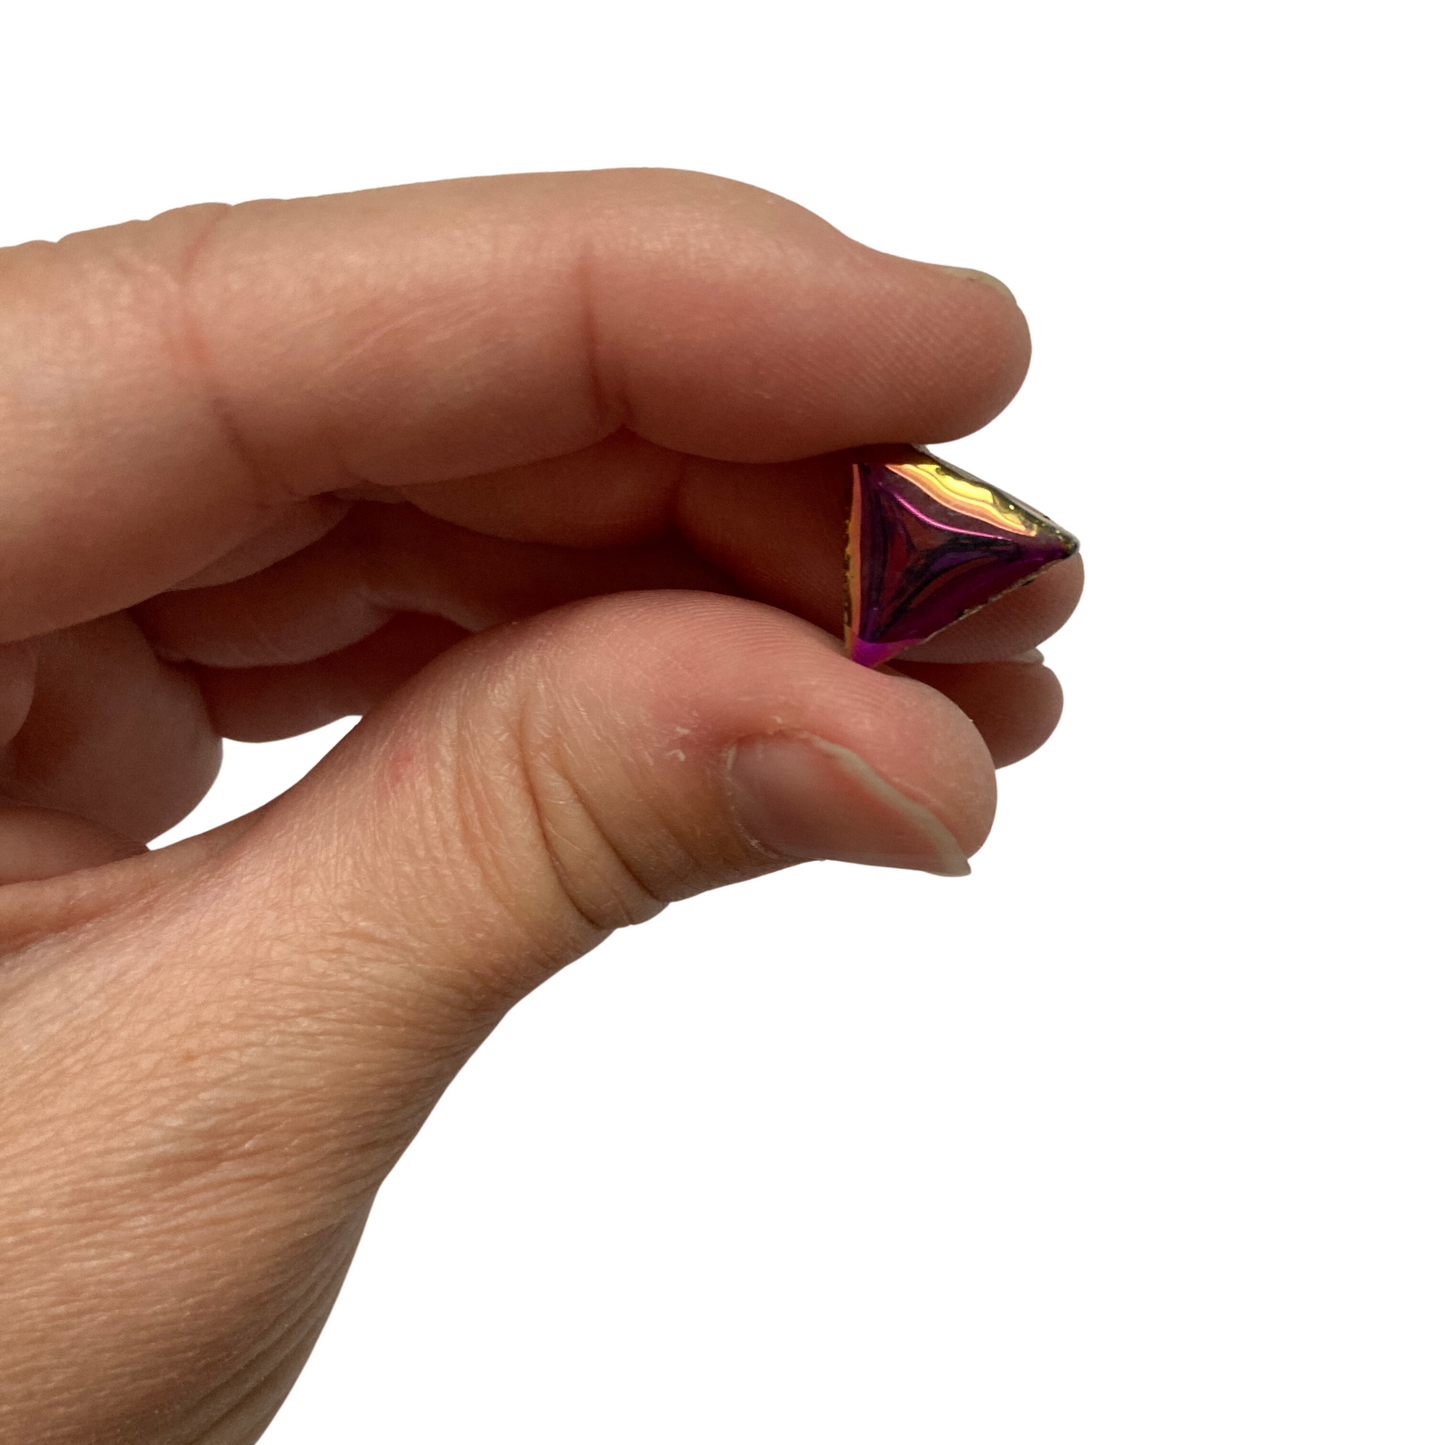 Iridescent Triangle Magnets